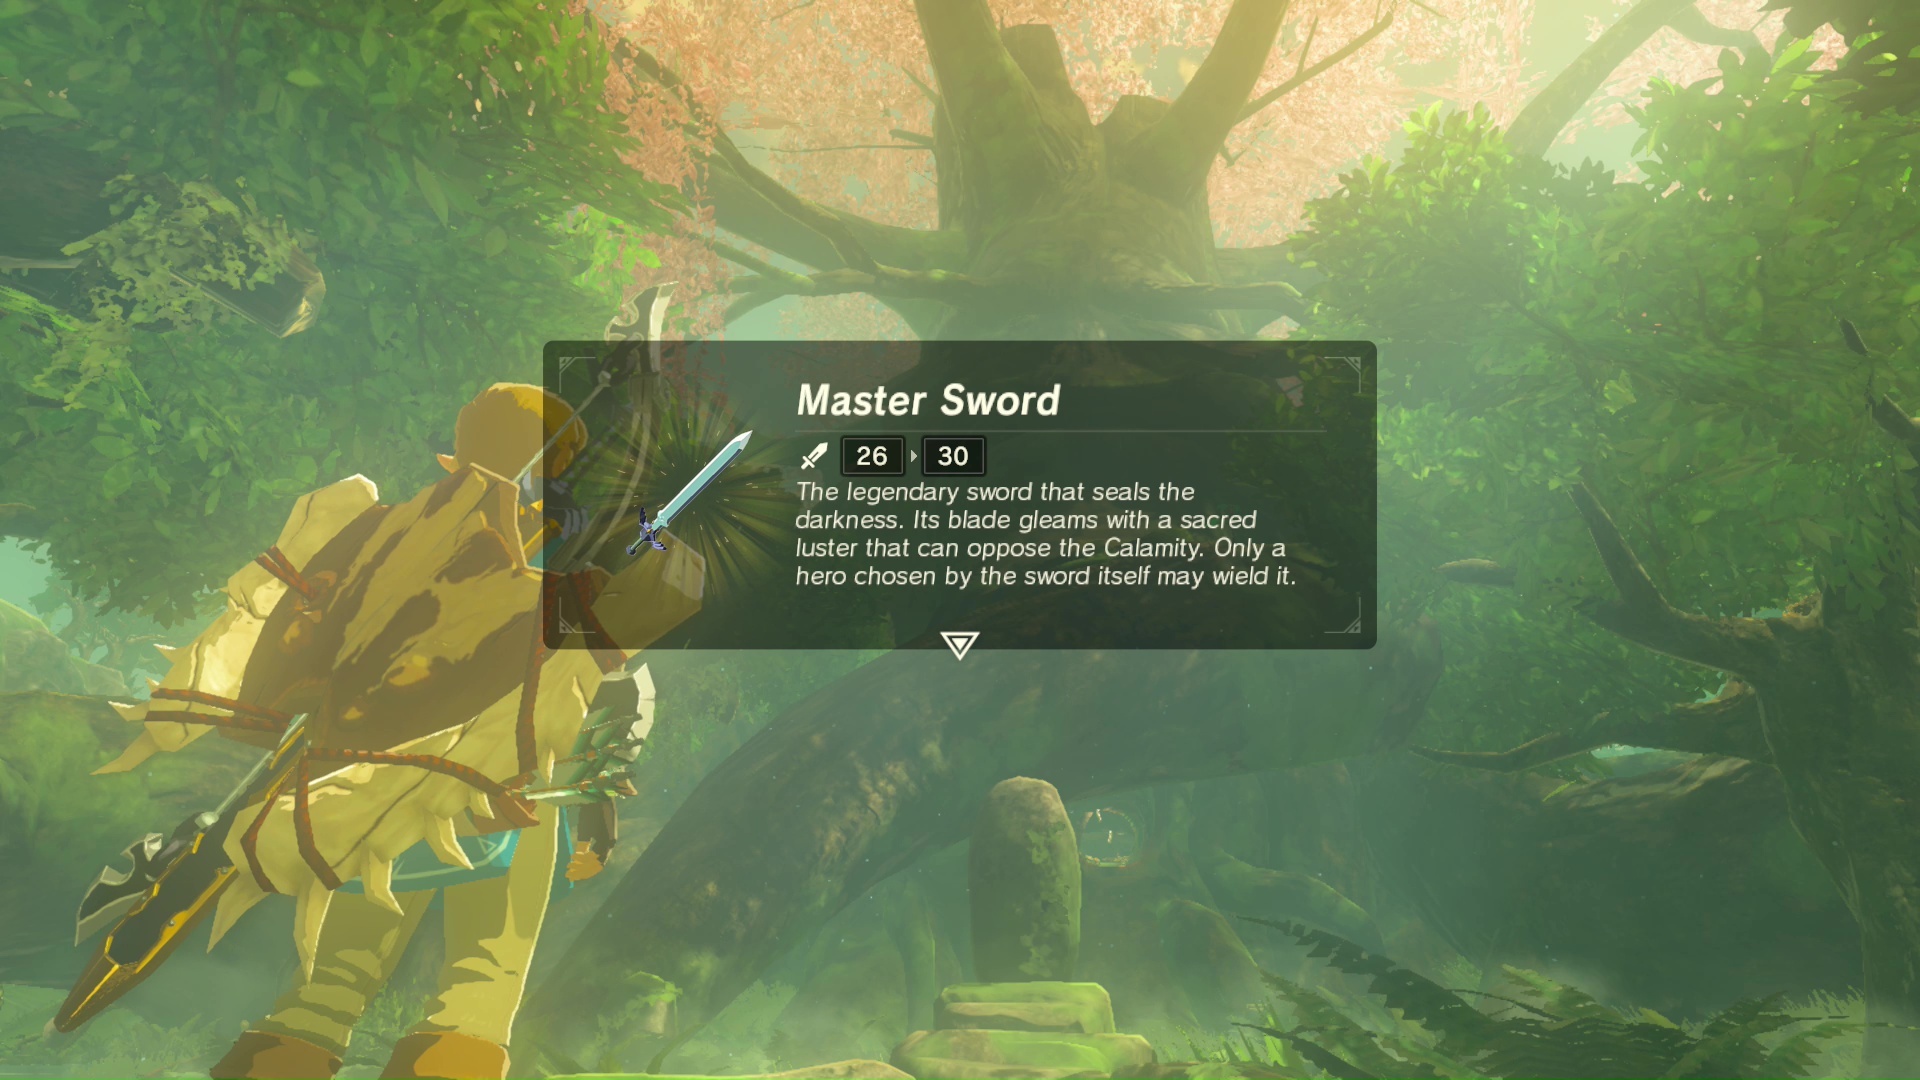 How long is The Legend of Zelda: Breath of the Wild - The Master